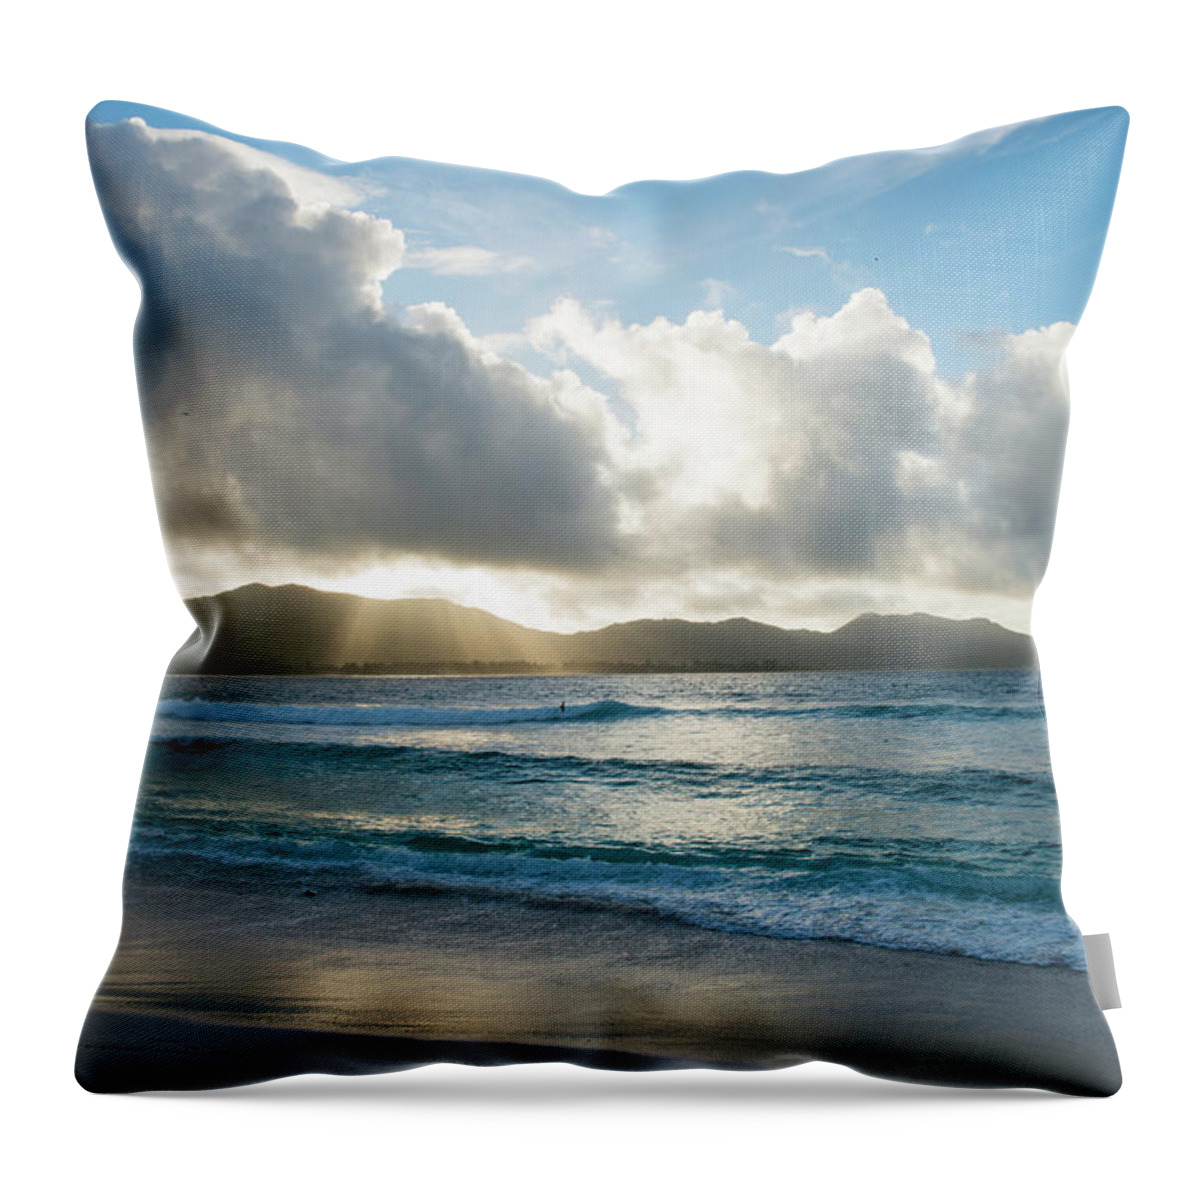 Tranquility Throw Pillow featuring the photograph Indian Ocean And Praslin Island At Dawn by James Warwick